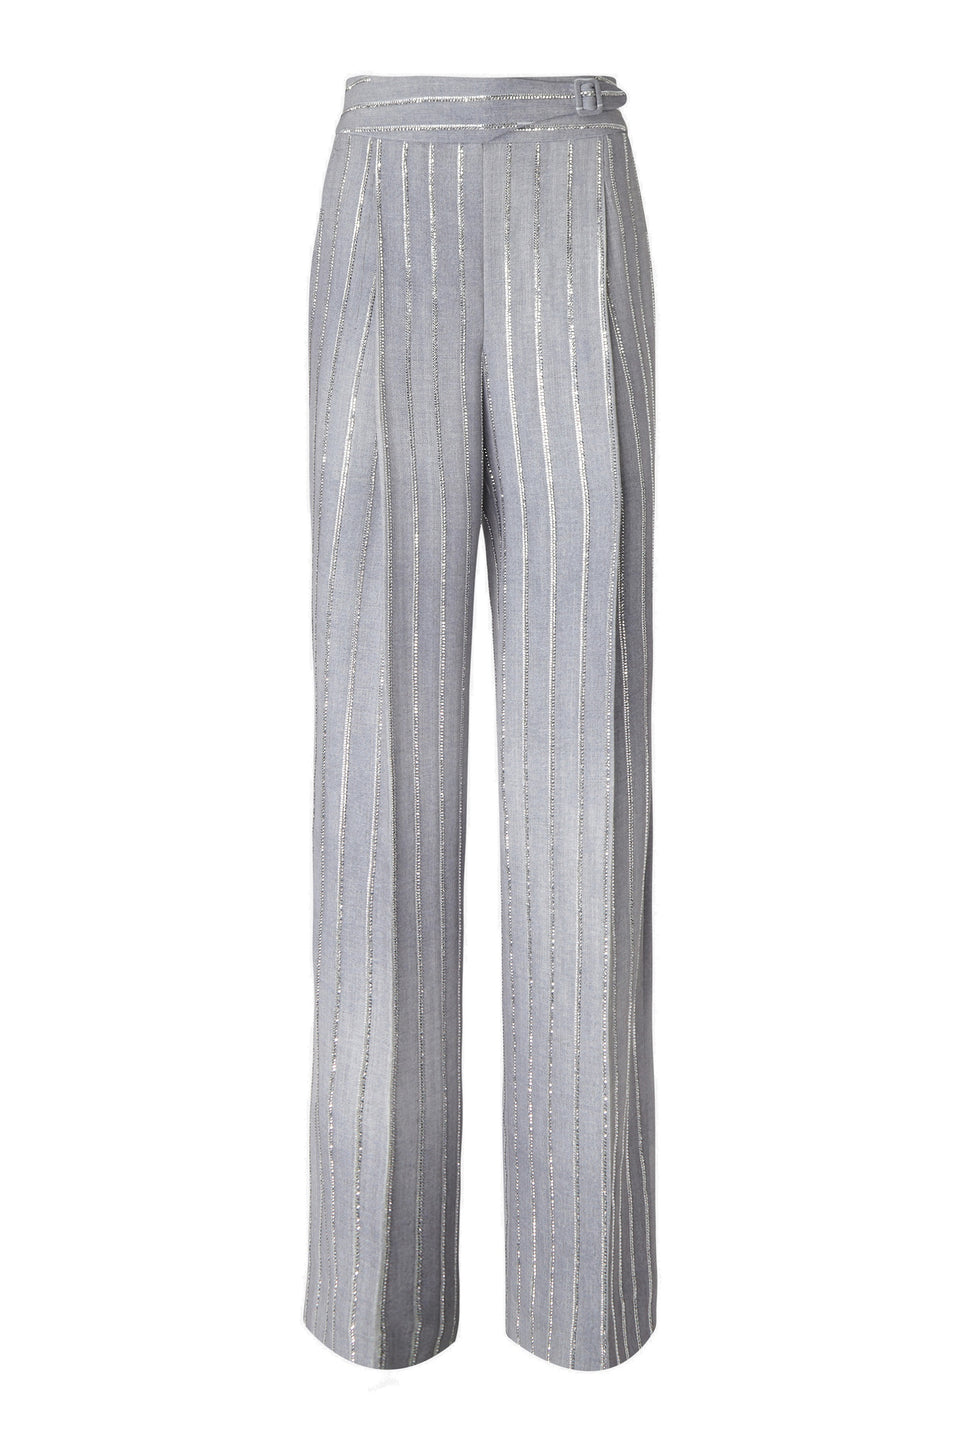 Tailored trousers in gray fabric